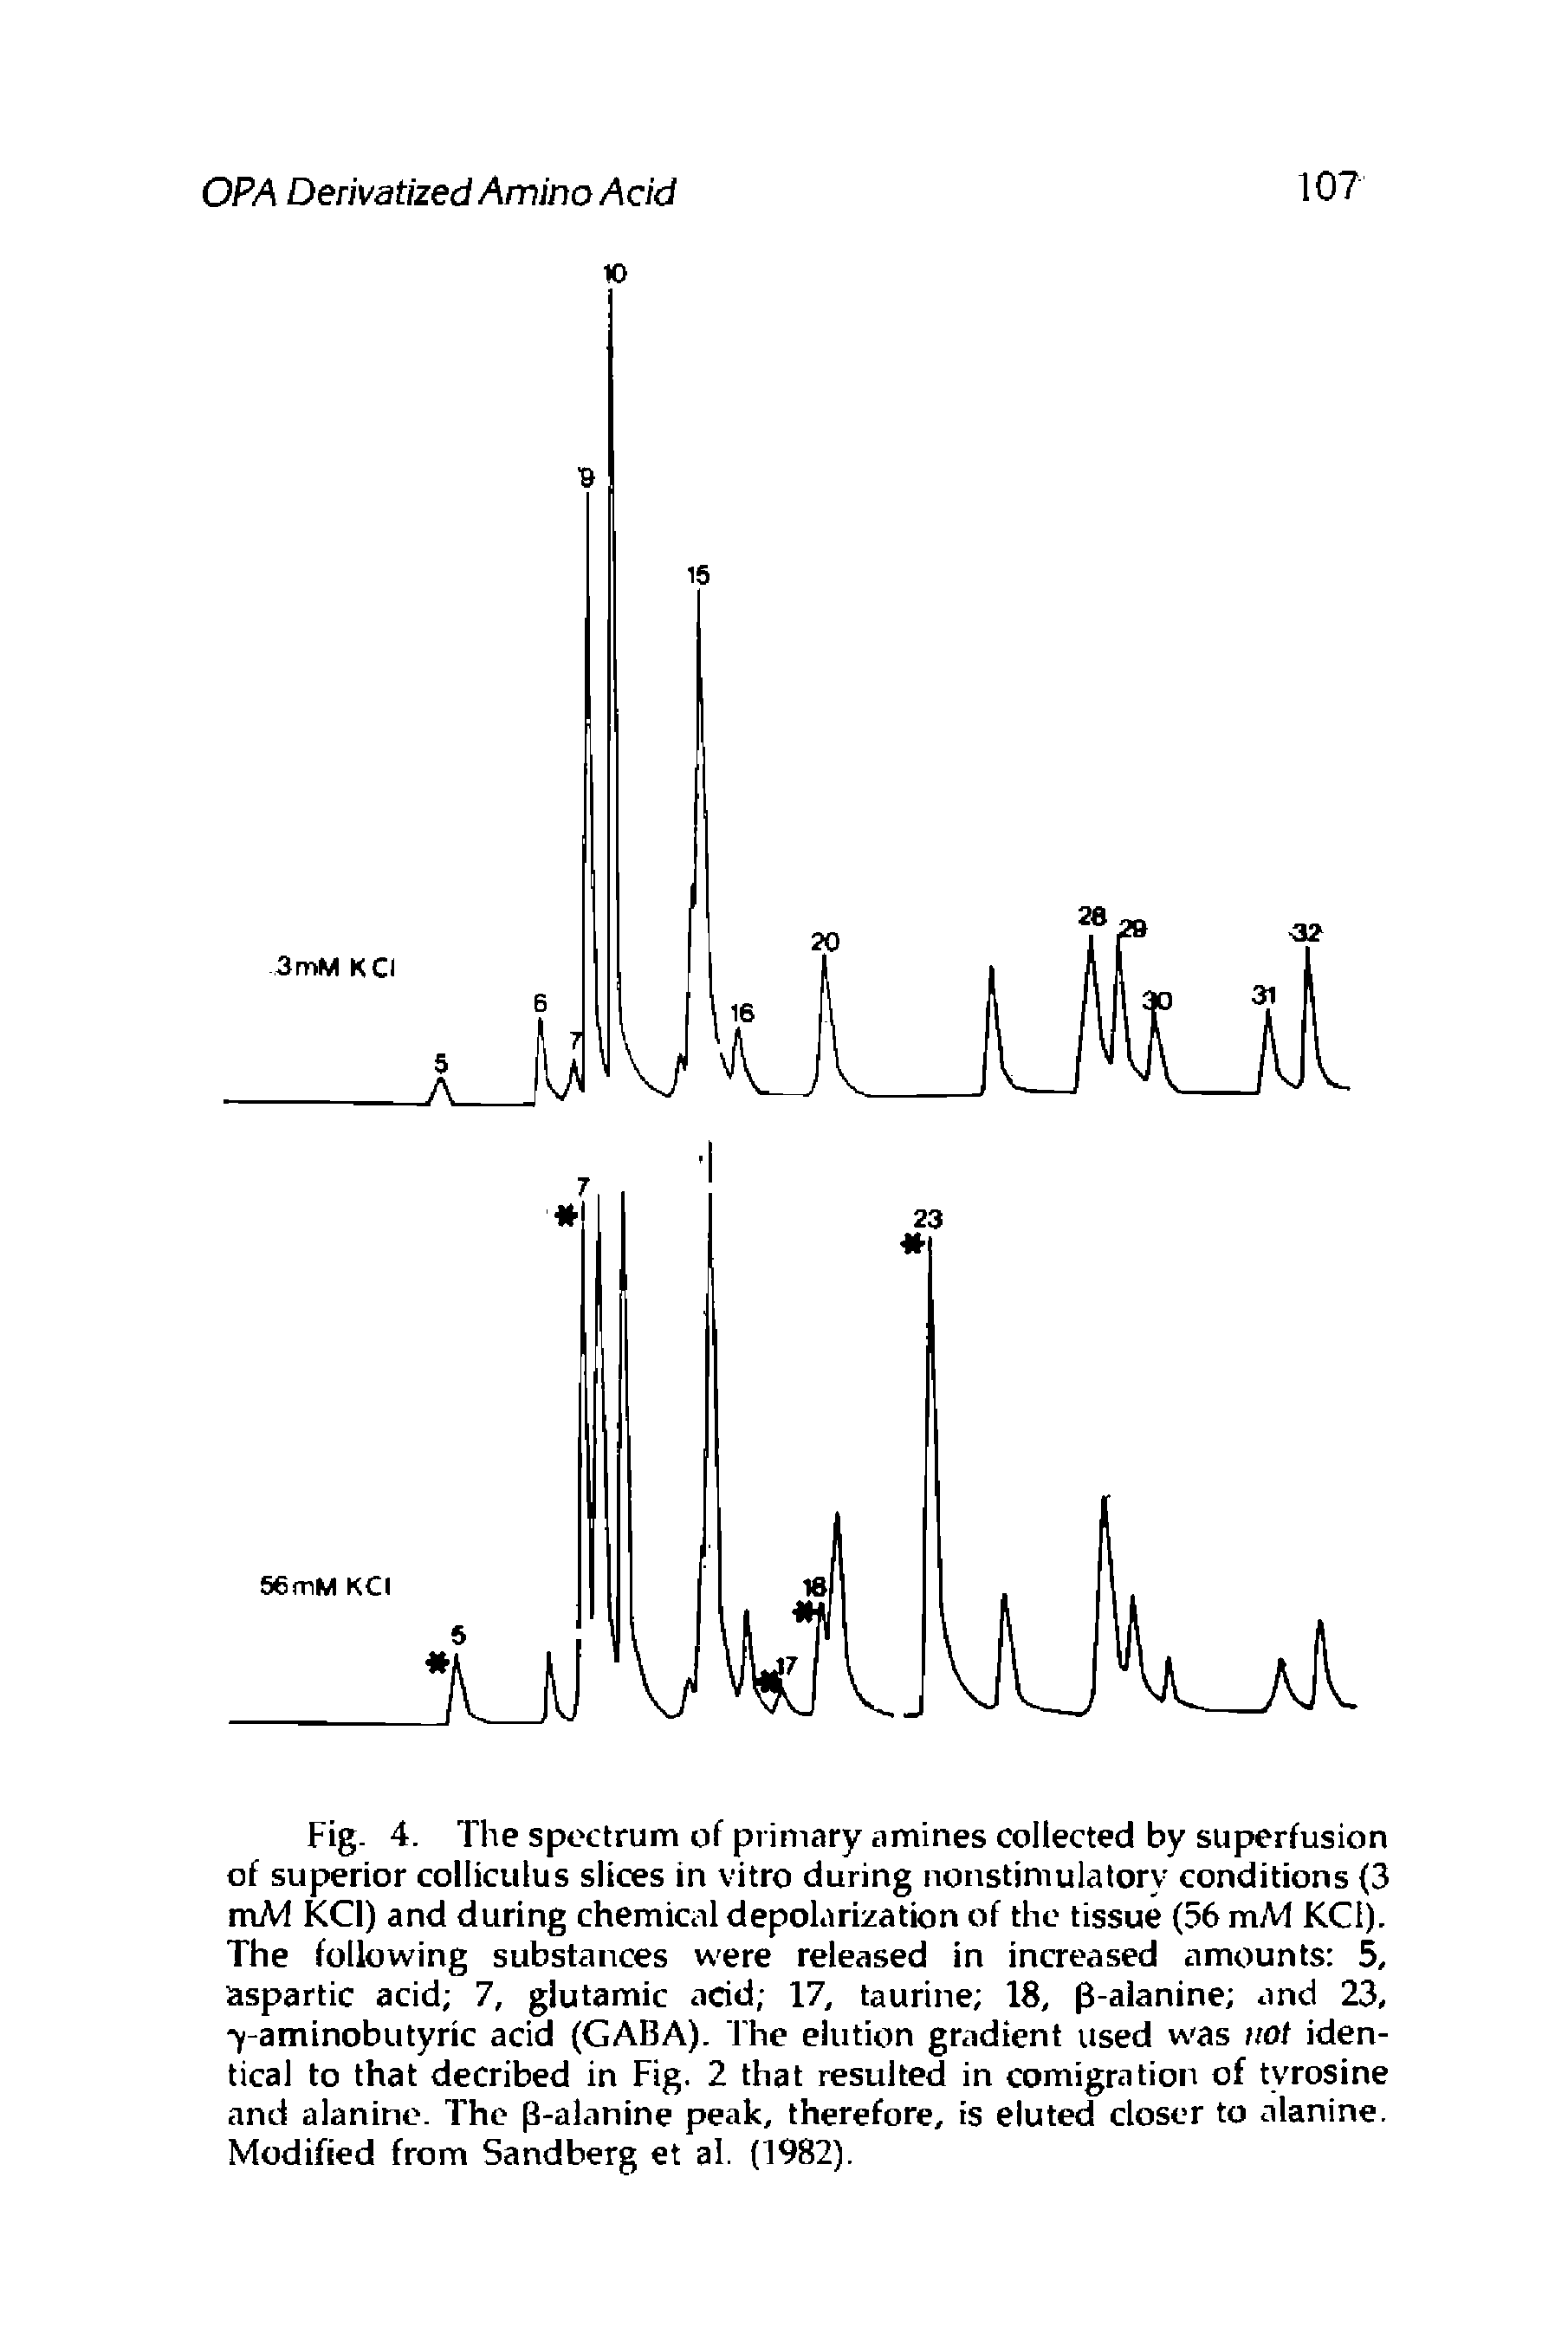 Fig. 4. The spectrum of primary amines collected by superfusion of superior colliculus slices in vitro during nonstimulatory conditions (3 mM KCI) and during chemical depolarization of the tissue (56 mM KCI). The following substances were released in increased amounts 5, aspartic acid 7, glutamic acid 17, taurine 18, p-alanine and 23, y-aminobutyric acid (GABA). The elution gradient used was not identical to that decribed in Fig. 2 that resulted in comigration of tyrosine and alanine. The p-alanine peak, therefore, is eluted closer to alanine. Modified from Sandberg et al. (1982).